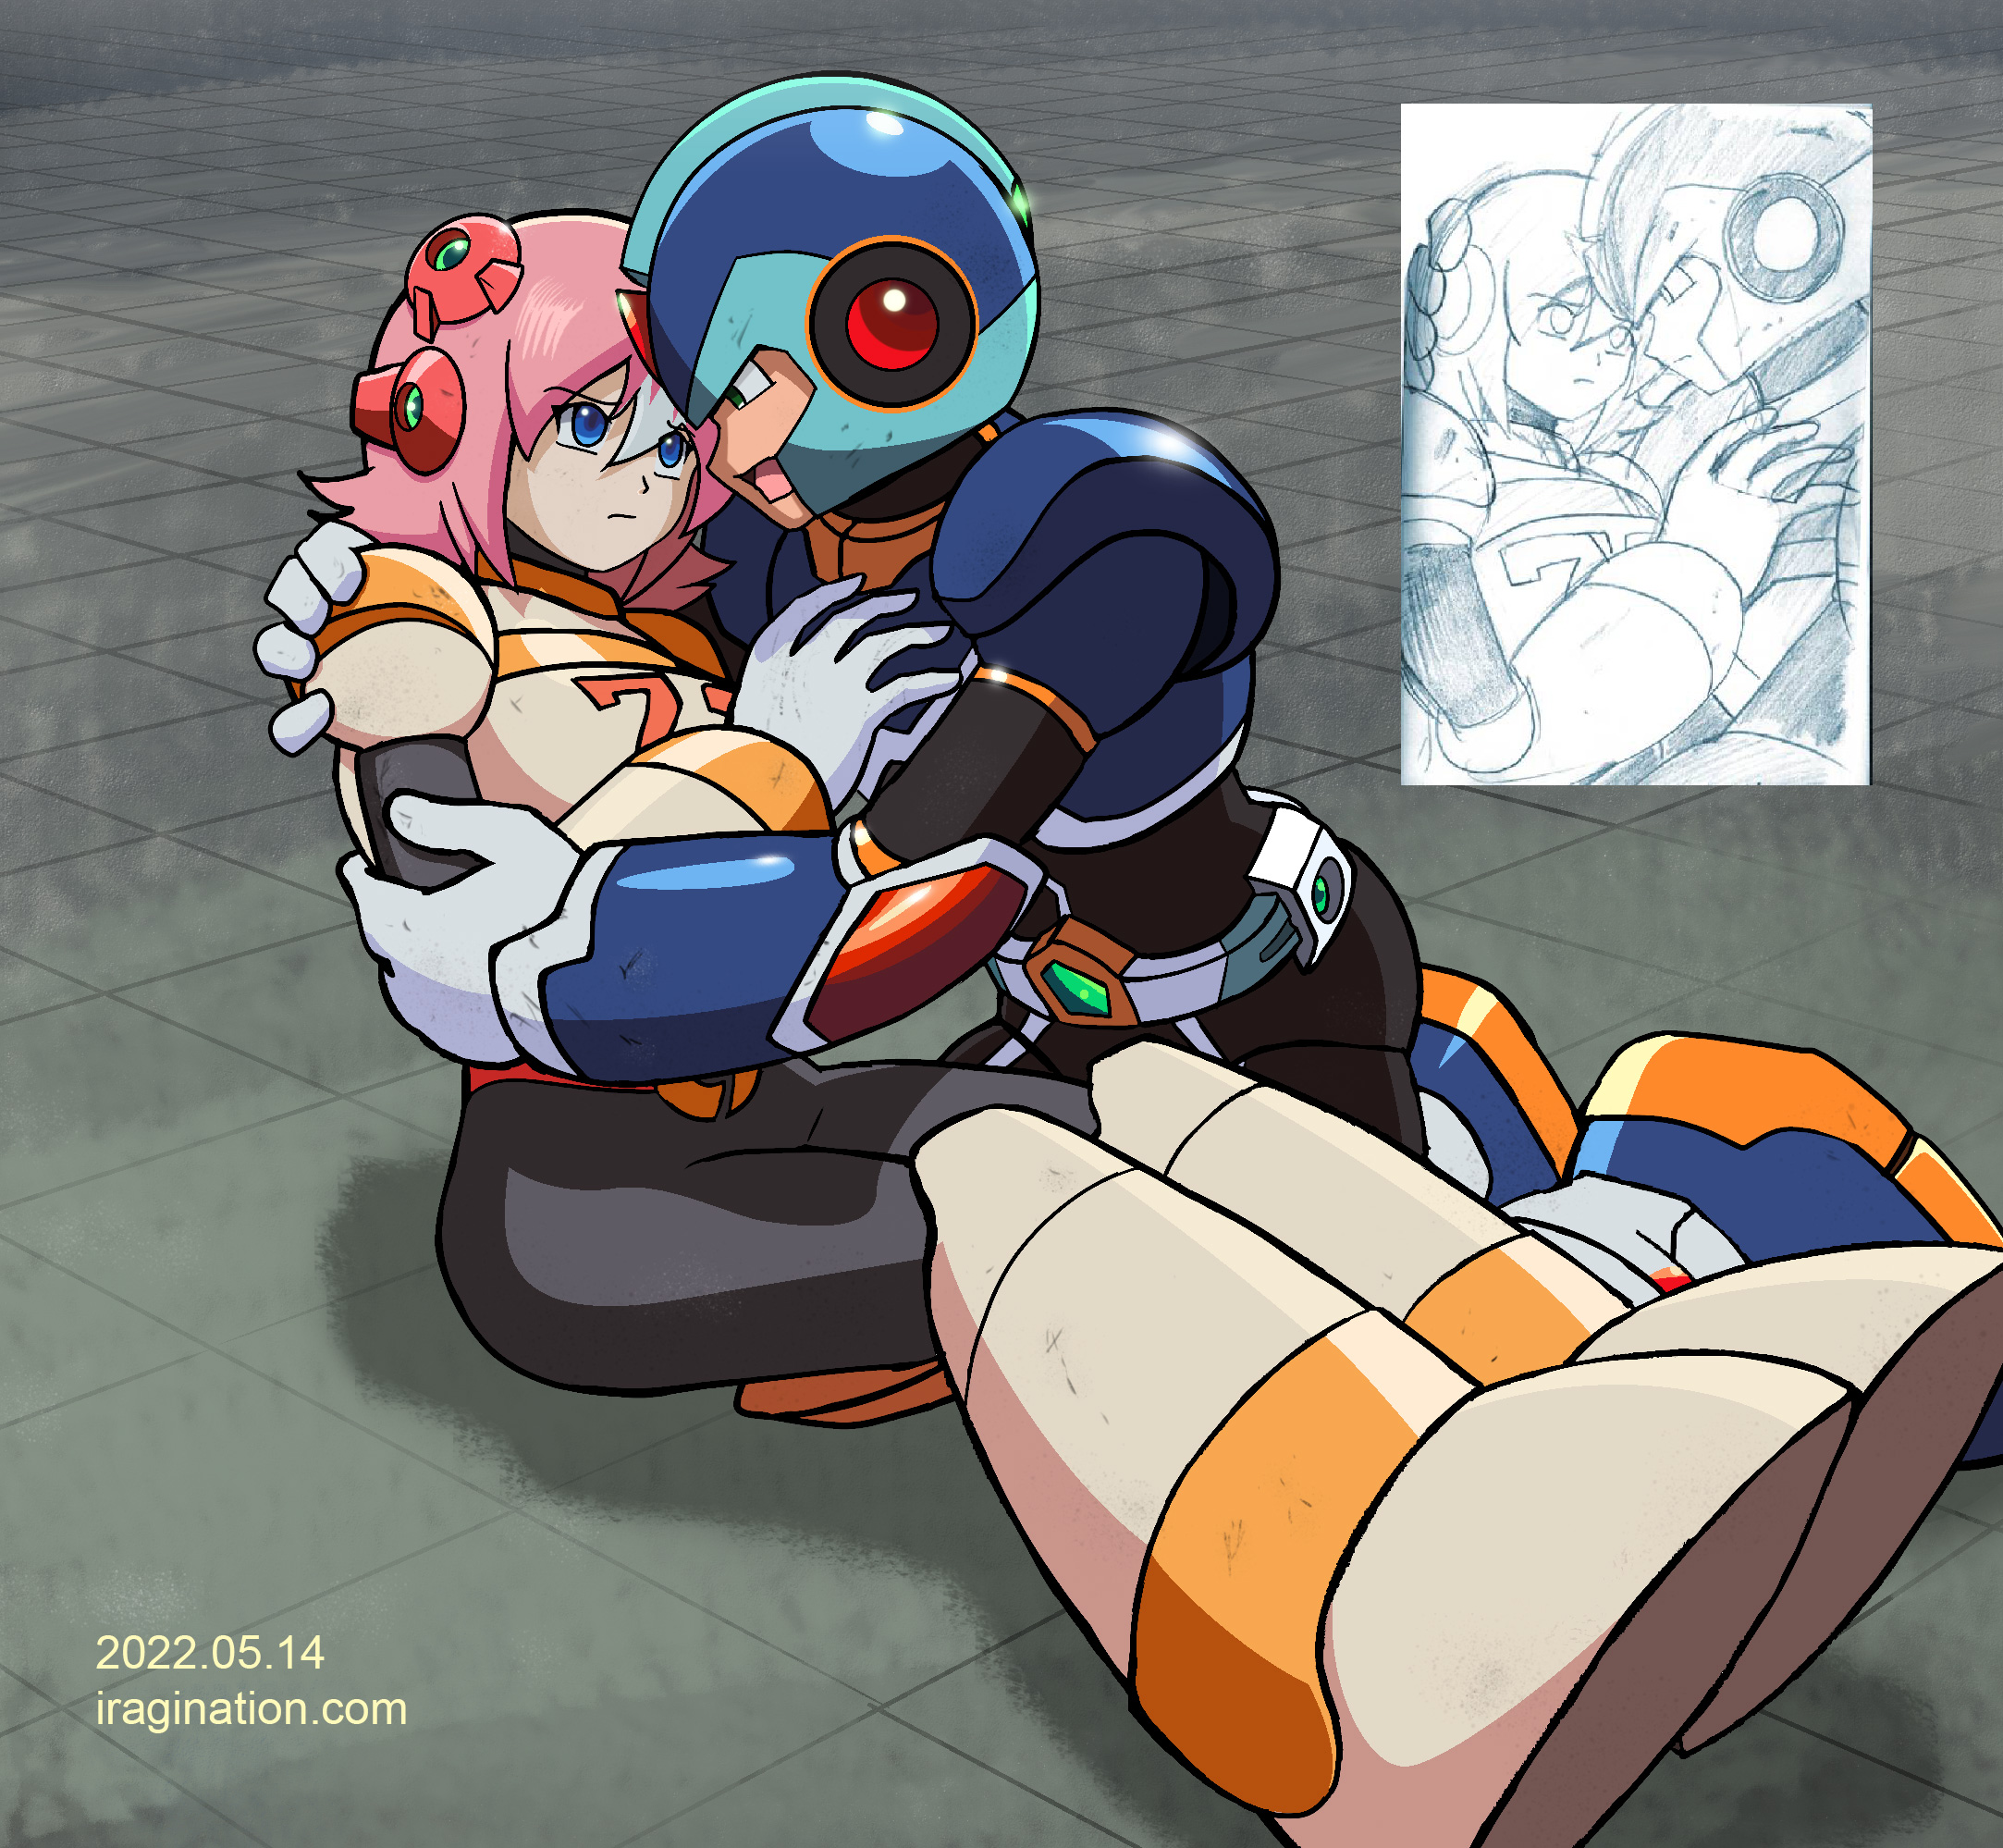 Nana and X
This is another redraw exercise based on a sketch I did many years ago. I remember I did those sketches based on the promotional material that was available back then when [b]Mega Man X Command Mission[/b] was announced. Meaning that I had no idea what the plot of the game was going to be. So, I assume I was looking forward to a close relationship developing between [b]X[/b] and [b]Nana[/b]. You know, [url=https://en.wikipedia.org/wiki/Shipping_(fandom)]shipping[/url].

That happened little in the end beyond the usual ambiguity you'd expect from CAPCOM games. Even so, I guess I could map this scene to the events right after the battle with [b]Silver Horn[/b]. 

In hindsight, I find it funny how after that boss battle, there is no exchange between Nana and the party members who just rescued her. She goes straight to her navigator job in the next chapter. 

What a wasted opportunity. We don’t get to see X succeeding in saving a female protagonist very often, and the poor girl must have been terrified of the whole ordeal. The plot decided instead to focus on Massimo’s confidence crisis. BTW, you could assume [b]Spider[/b] and [b]Massimo[/b] are somewhere behind them off-screen.

Ok, so this was a much more complex exercise since I took that original close-up sketch and essentially drew everything around it to complete the scene. I learned a couple of new tricks that I plan to keep exploring. It is always fun to try new things.

[b]Previous Entries[/b]

[url=https://www.iragination.com/illust/displayimage.php?pid=560]Nana[/url]

[url=https://www.iragination.com/illust/displayimage.php?pid=561]Nana and Alia[/url]

Mega Man X (C) CAPCOM

Keywords: nana x